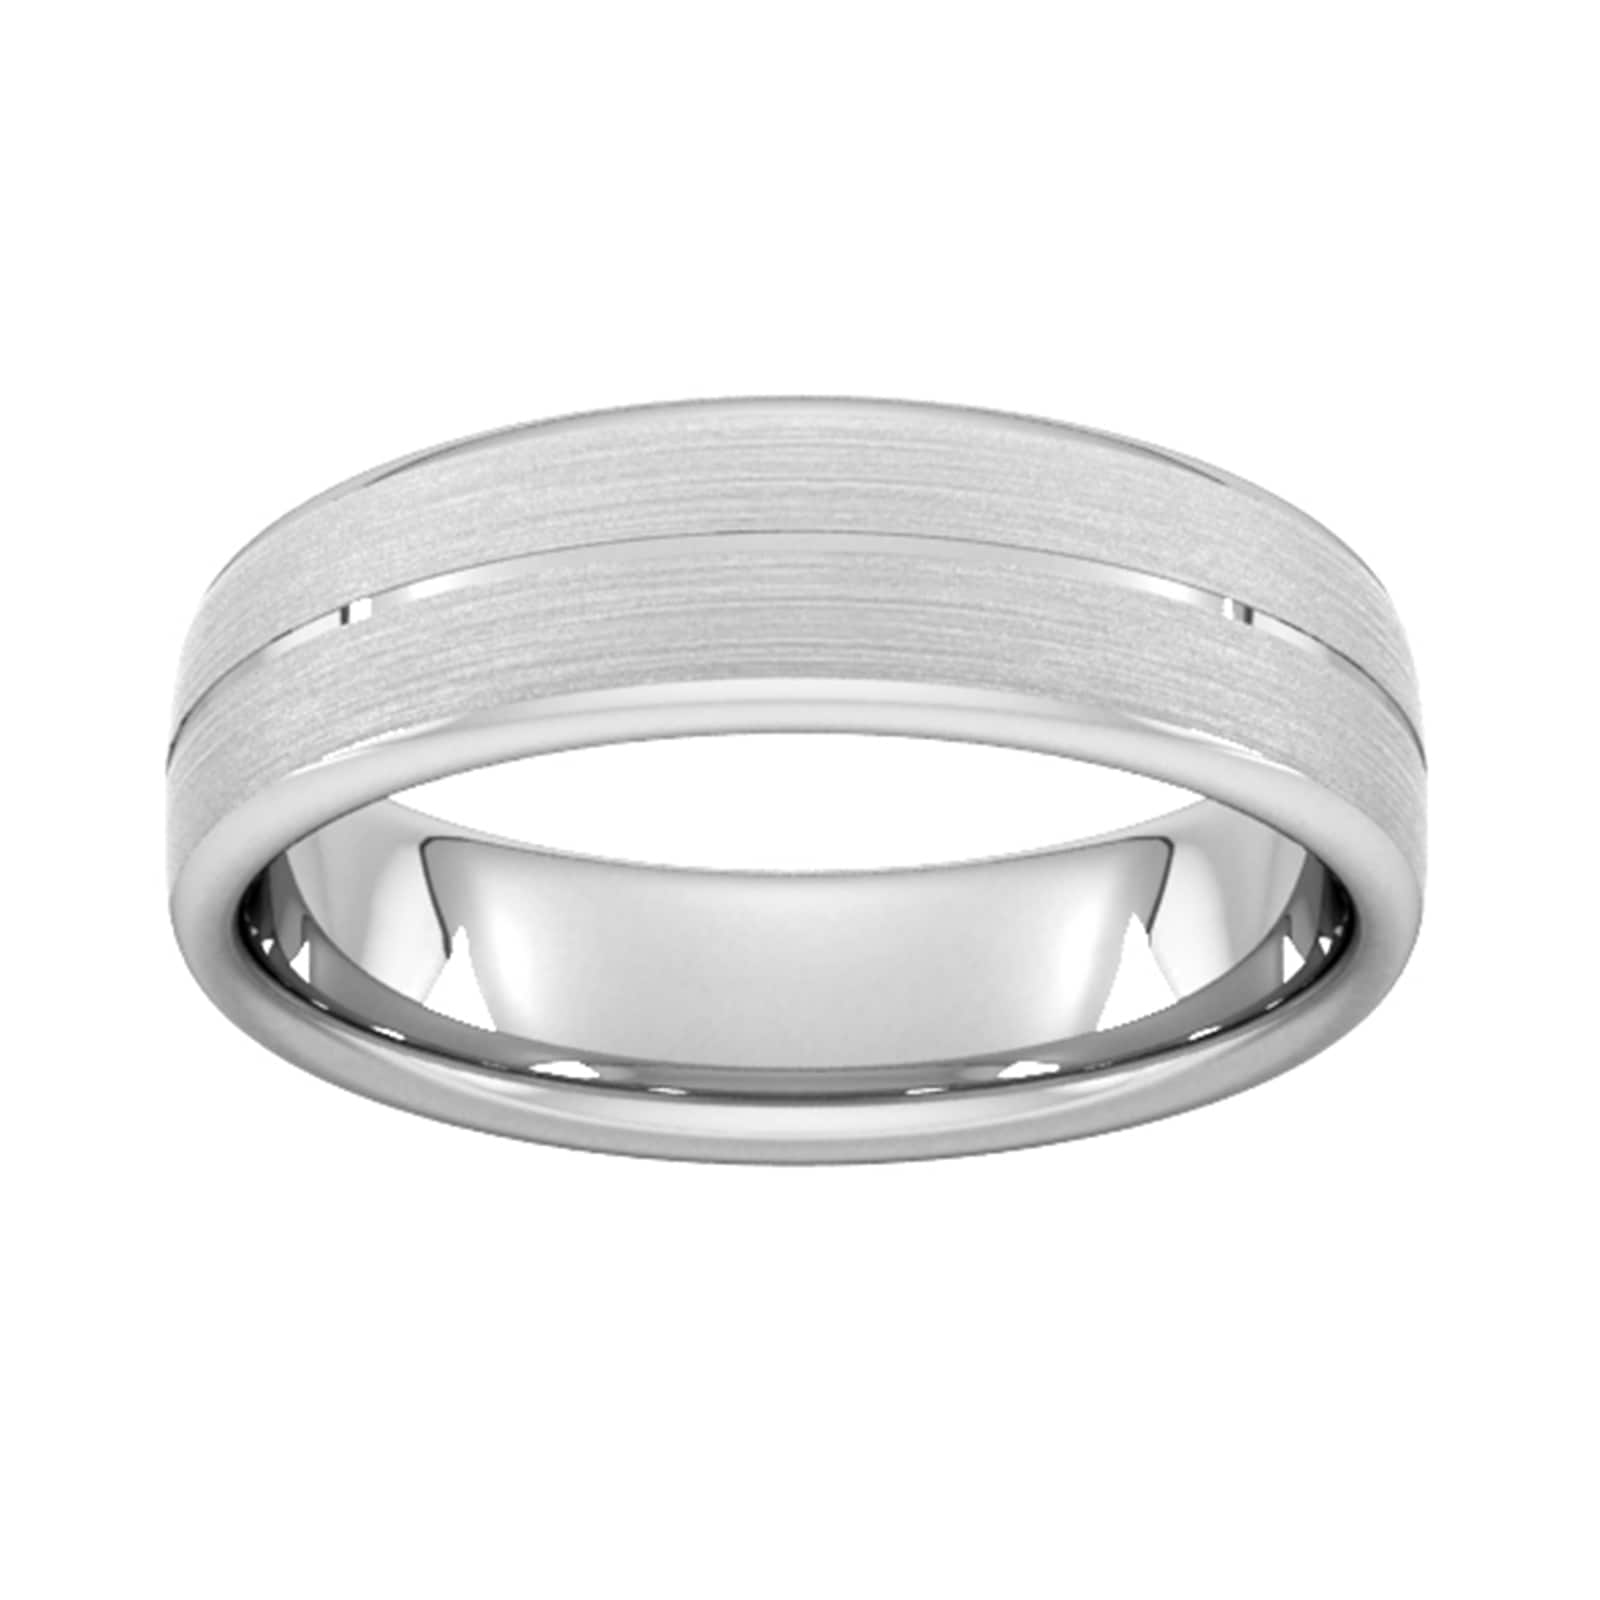 6mm Slight Court Heavy Centre Groove With Chamfered Edge Wedding Ring In 18 Carat White Gold - Ring Size S